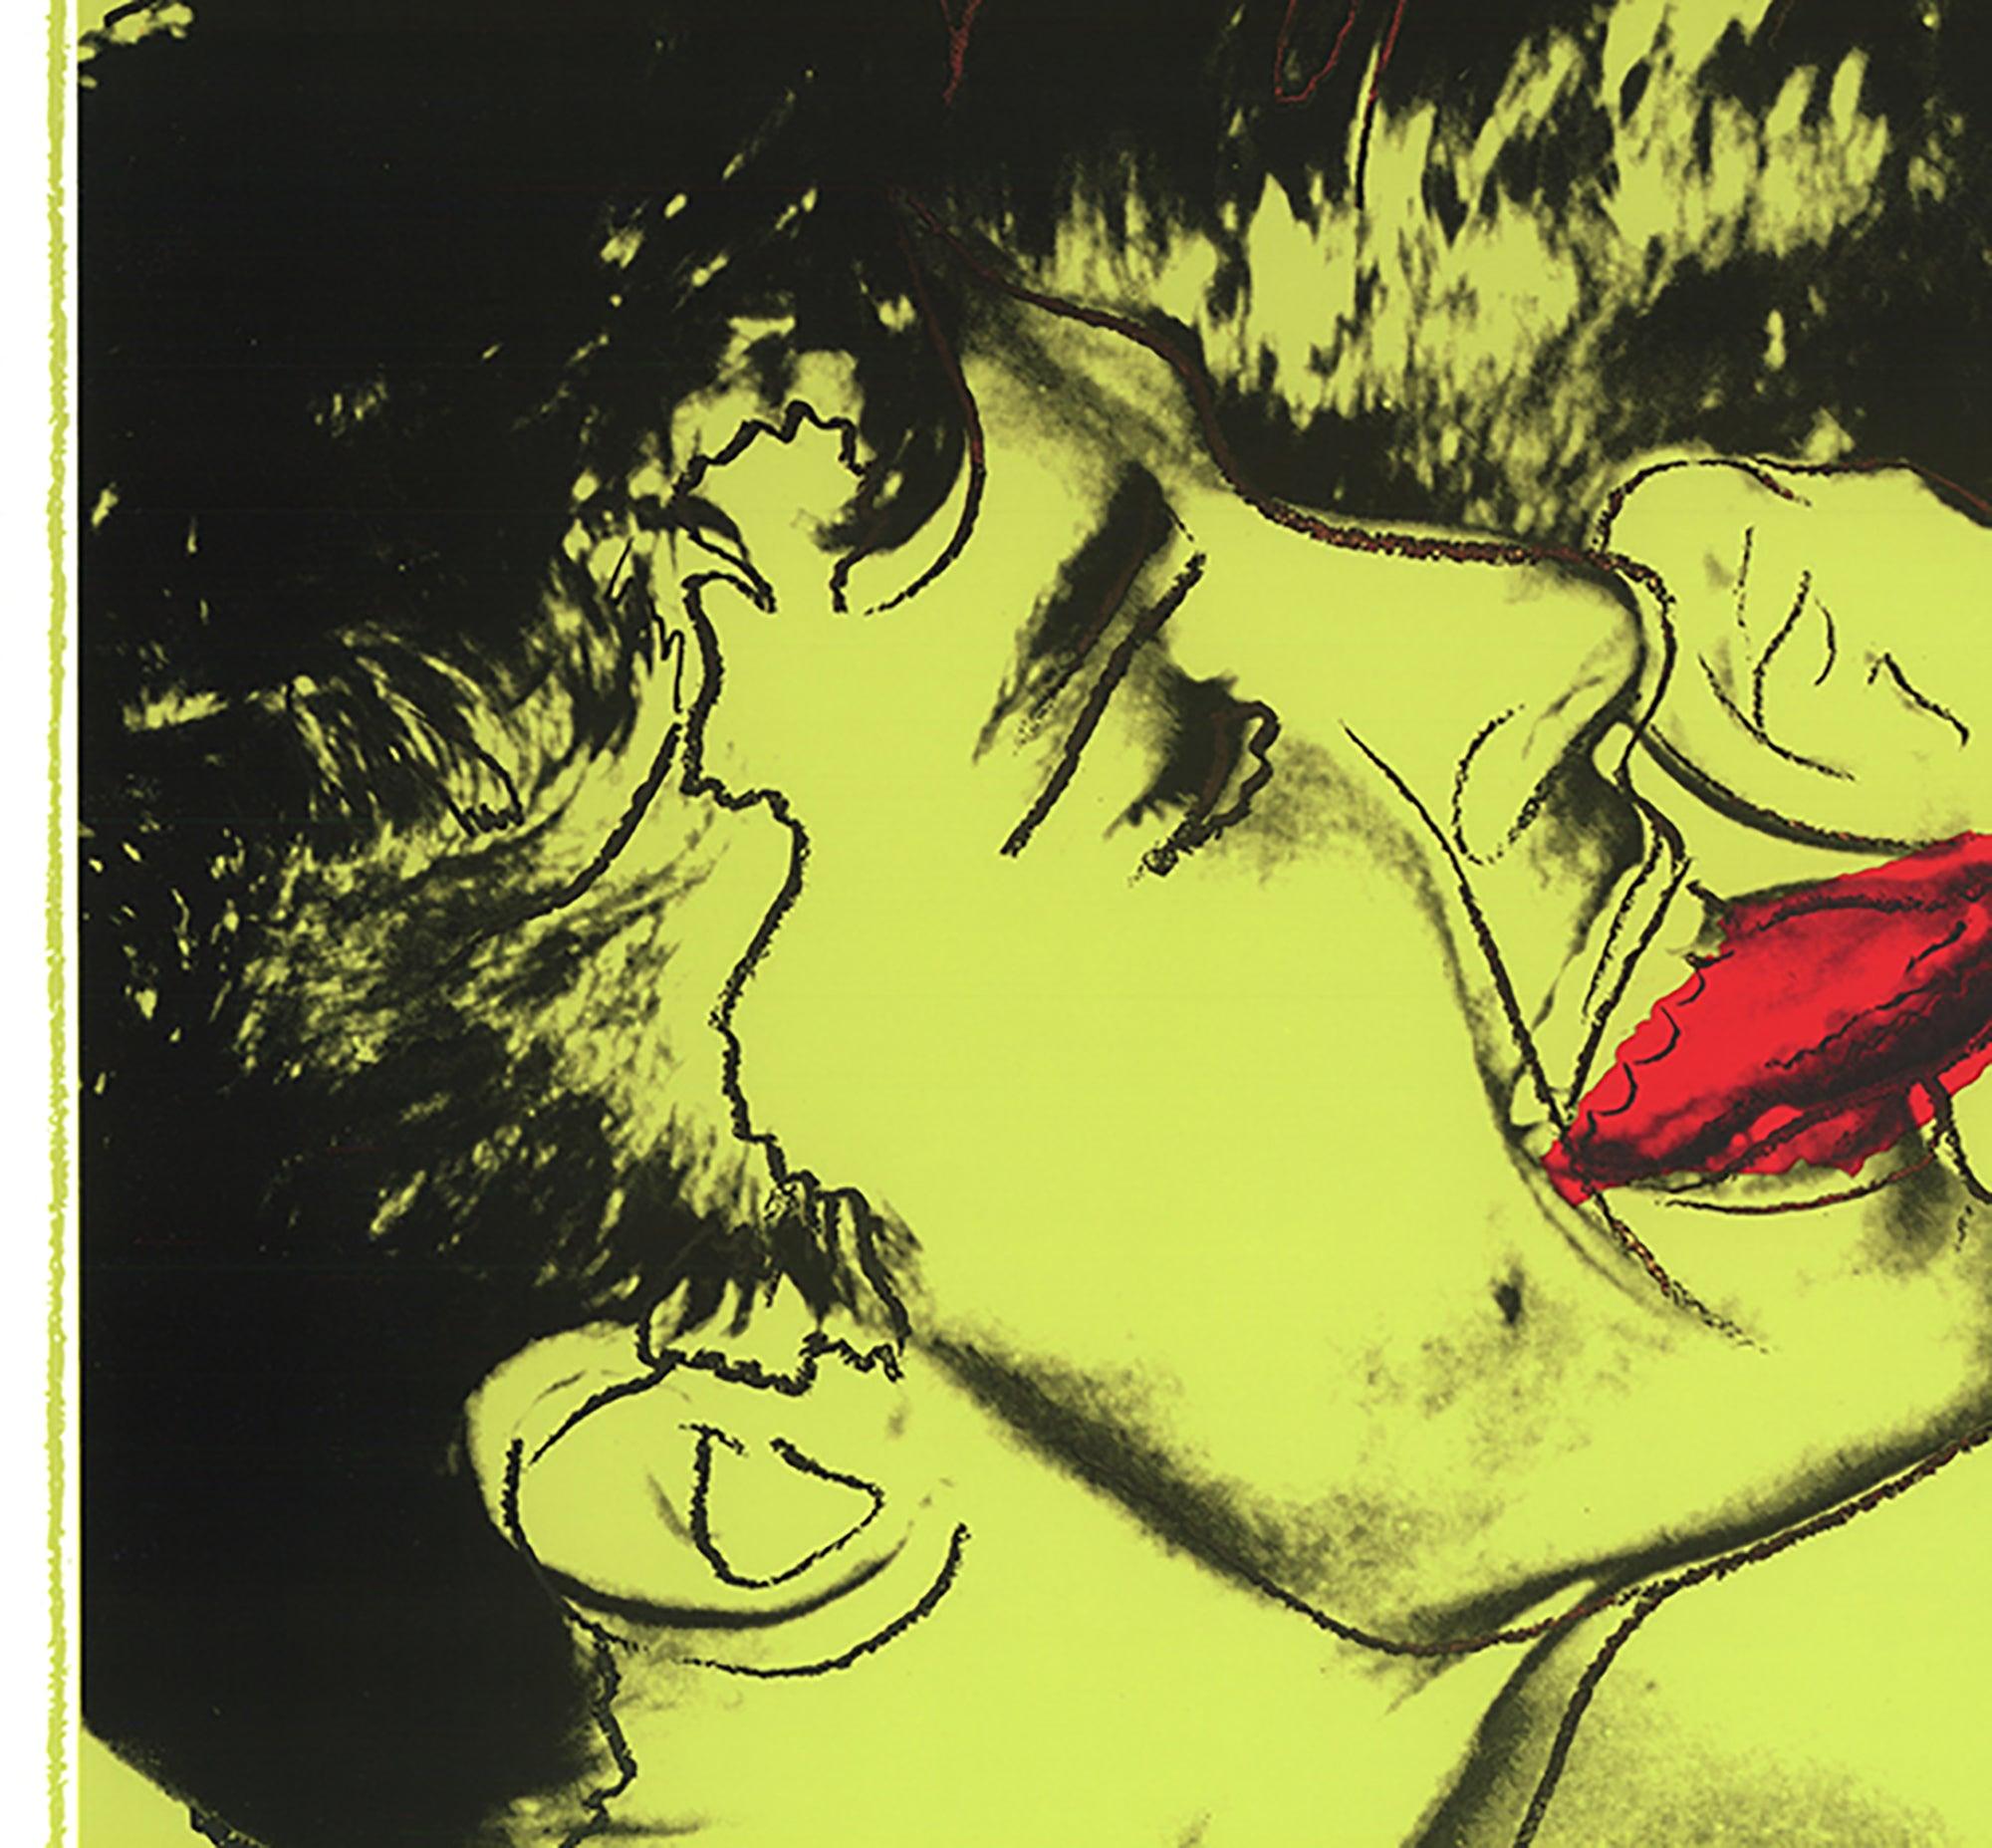 Andy Warhol-Querelle -Poster-1983- FIRST EDITION  - Pop Art Print by (after) Andy Warhol